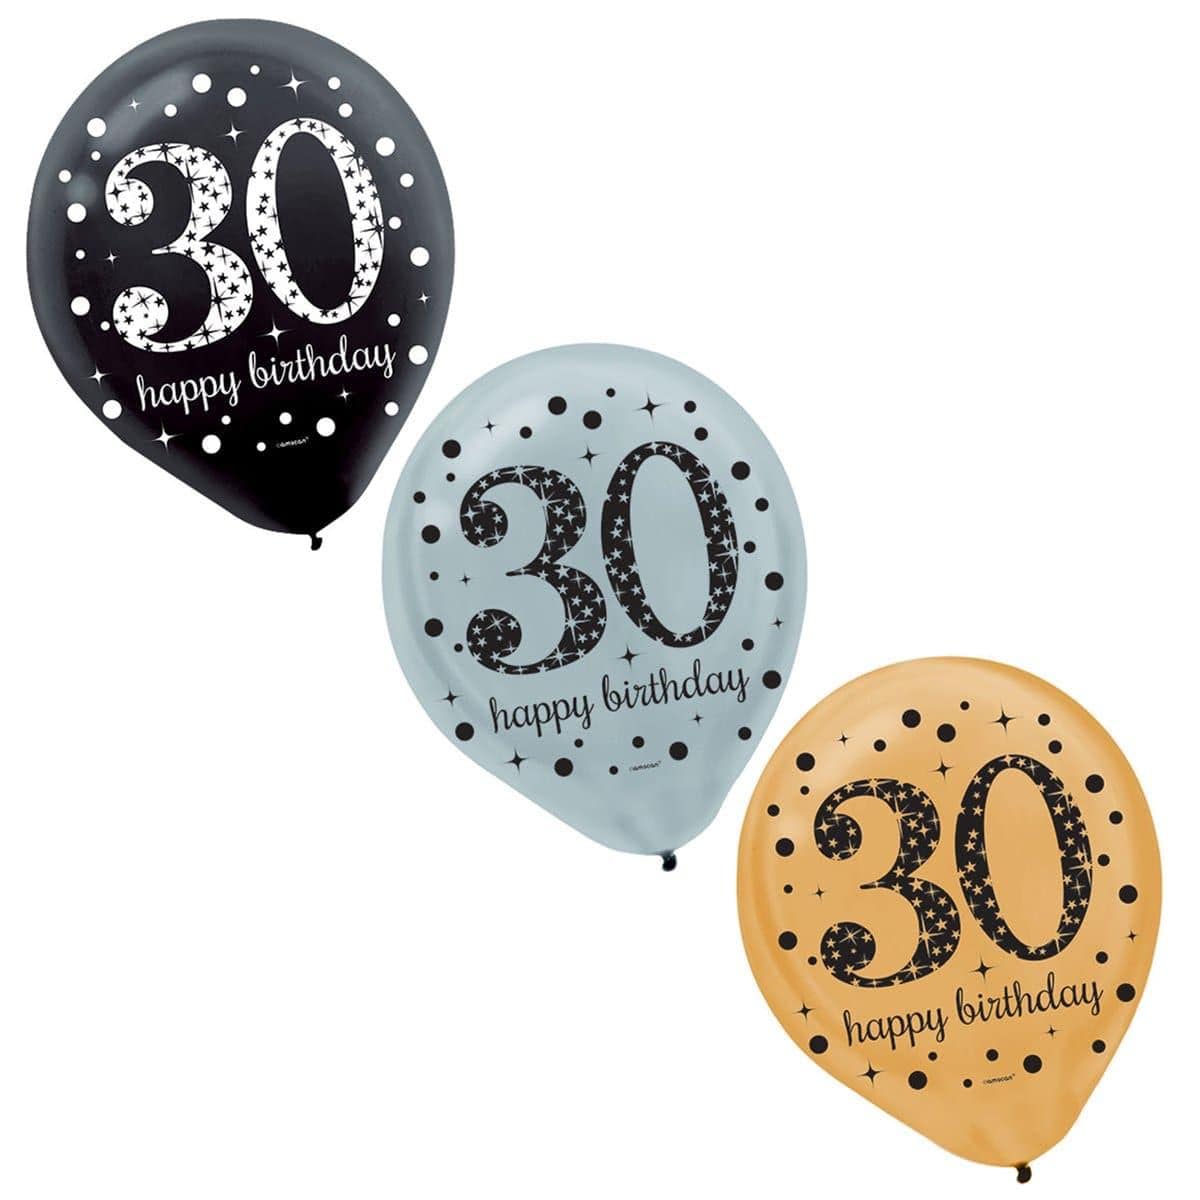 Buy Age Specific Birthday 30th Sparkling Celeb - Latex Balloons 15/pkg sold at Party Expert